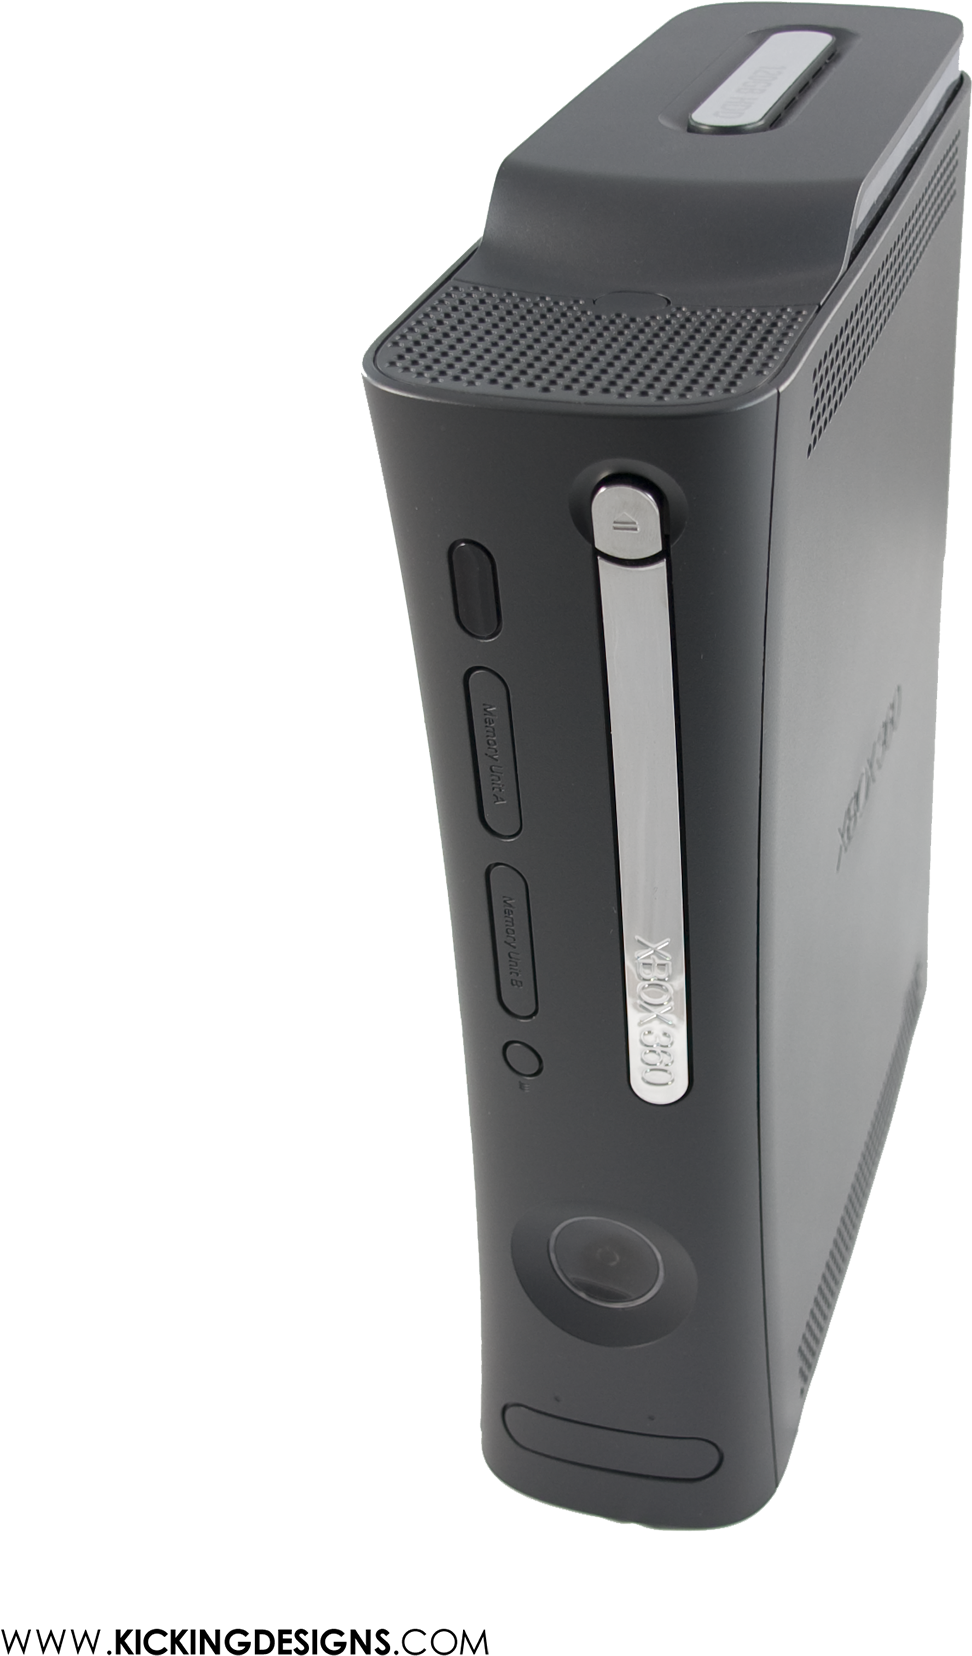 Xbox 360 - Computer Case (1800x1747), Png Download